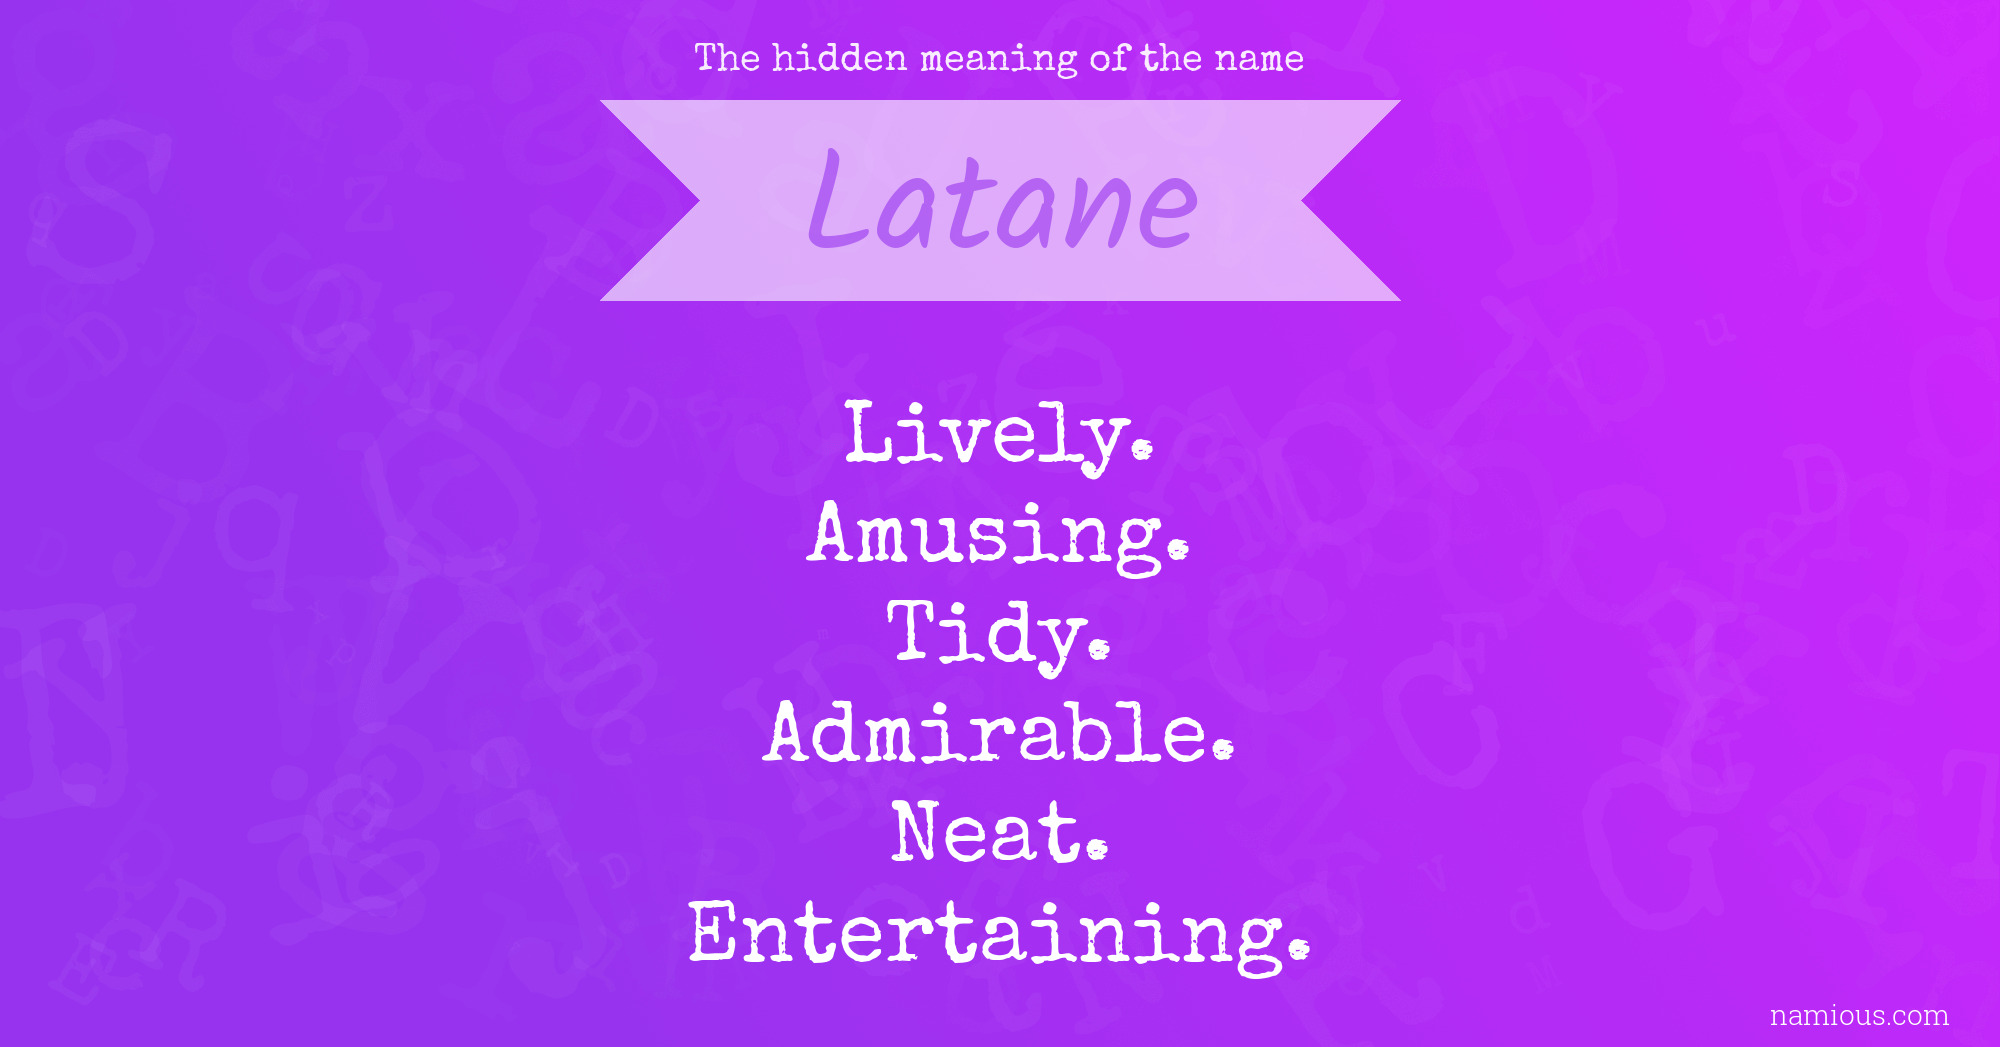 The hidden meaning of the name Latane